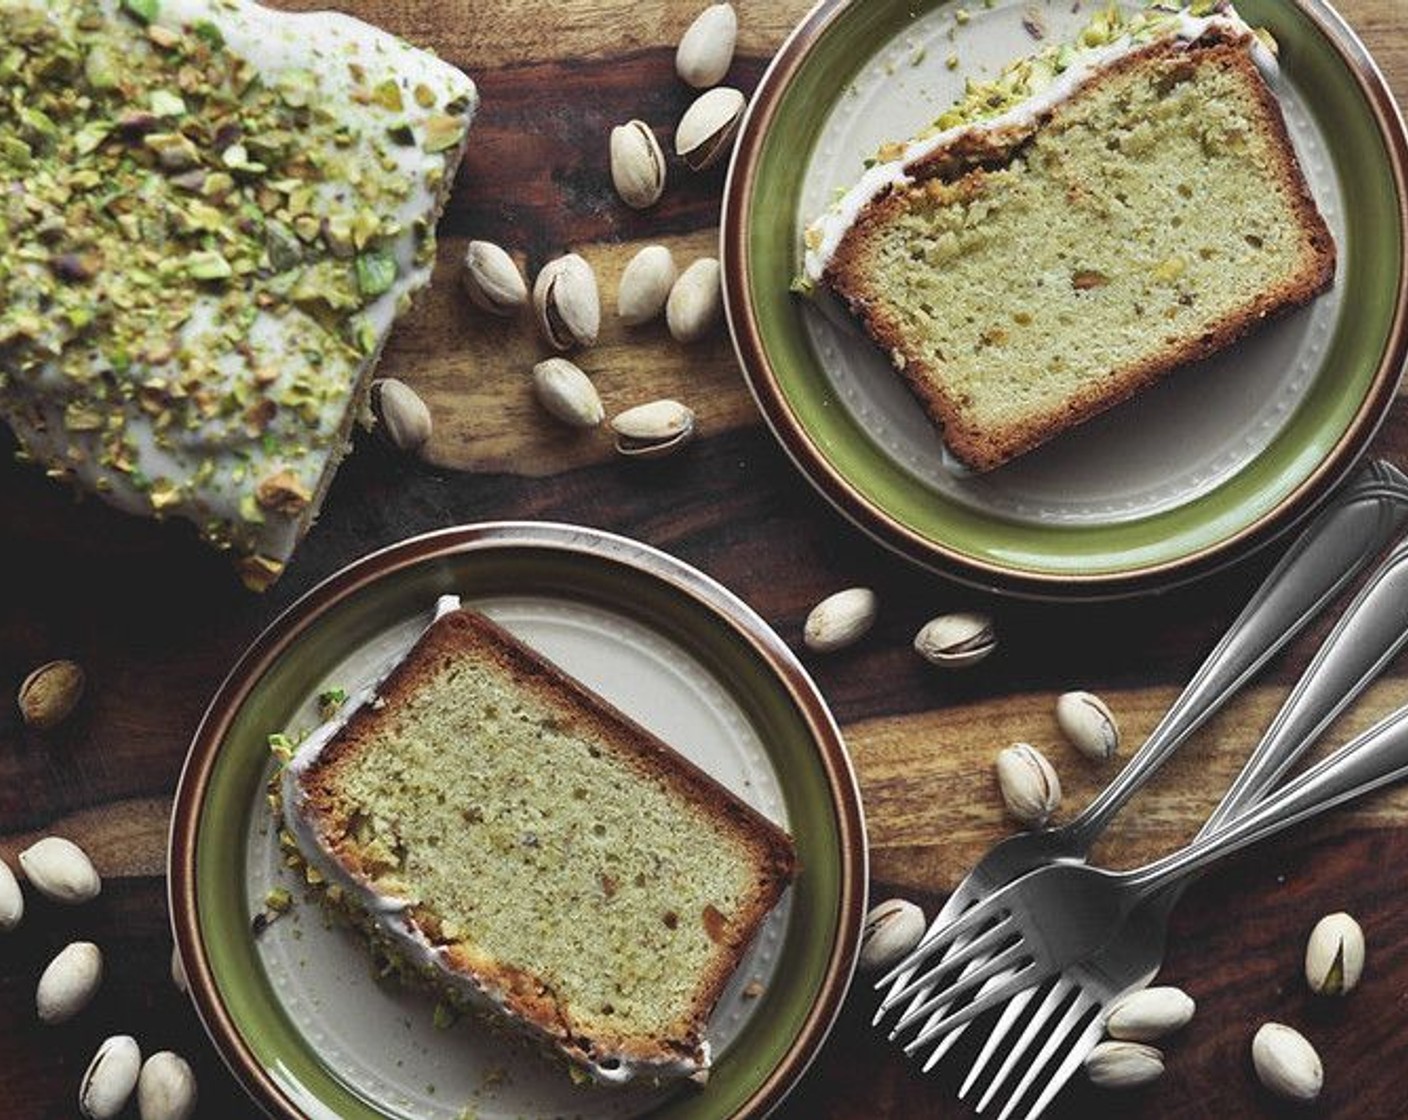 step 10 Let the cakes cool on a rack for about 20 minutes. Unmold and discard the parchment paper. Allow the cakes to cool completely before frosting and topping with additional chopped Pistachios (1/2 cup). Serve right away.